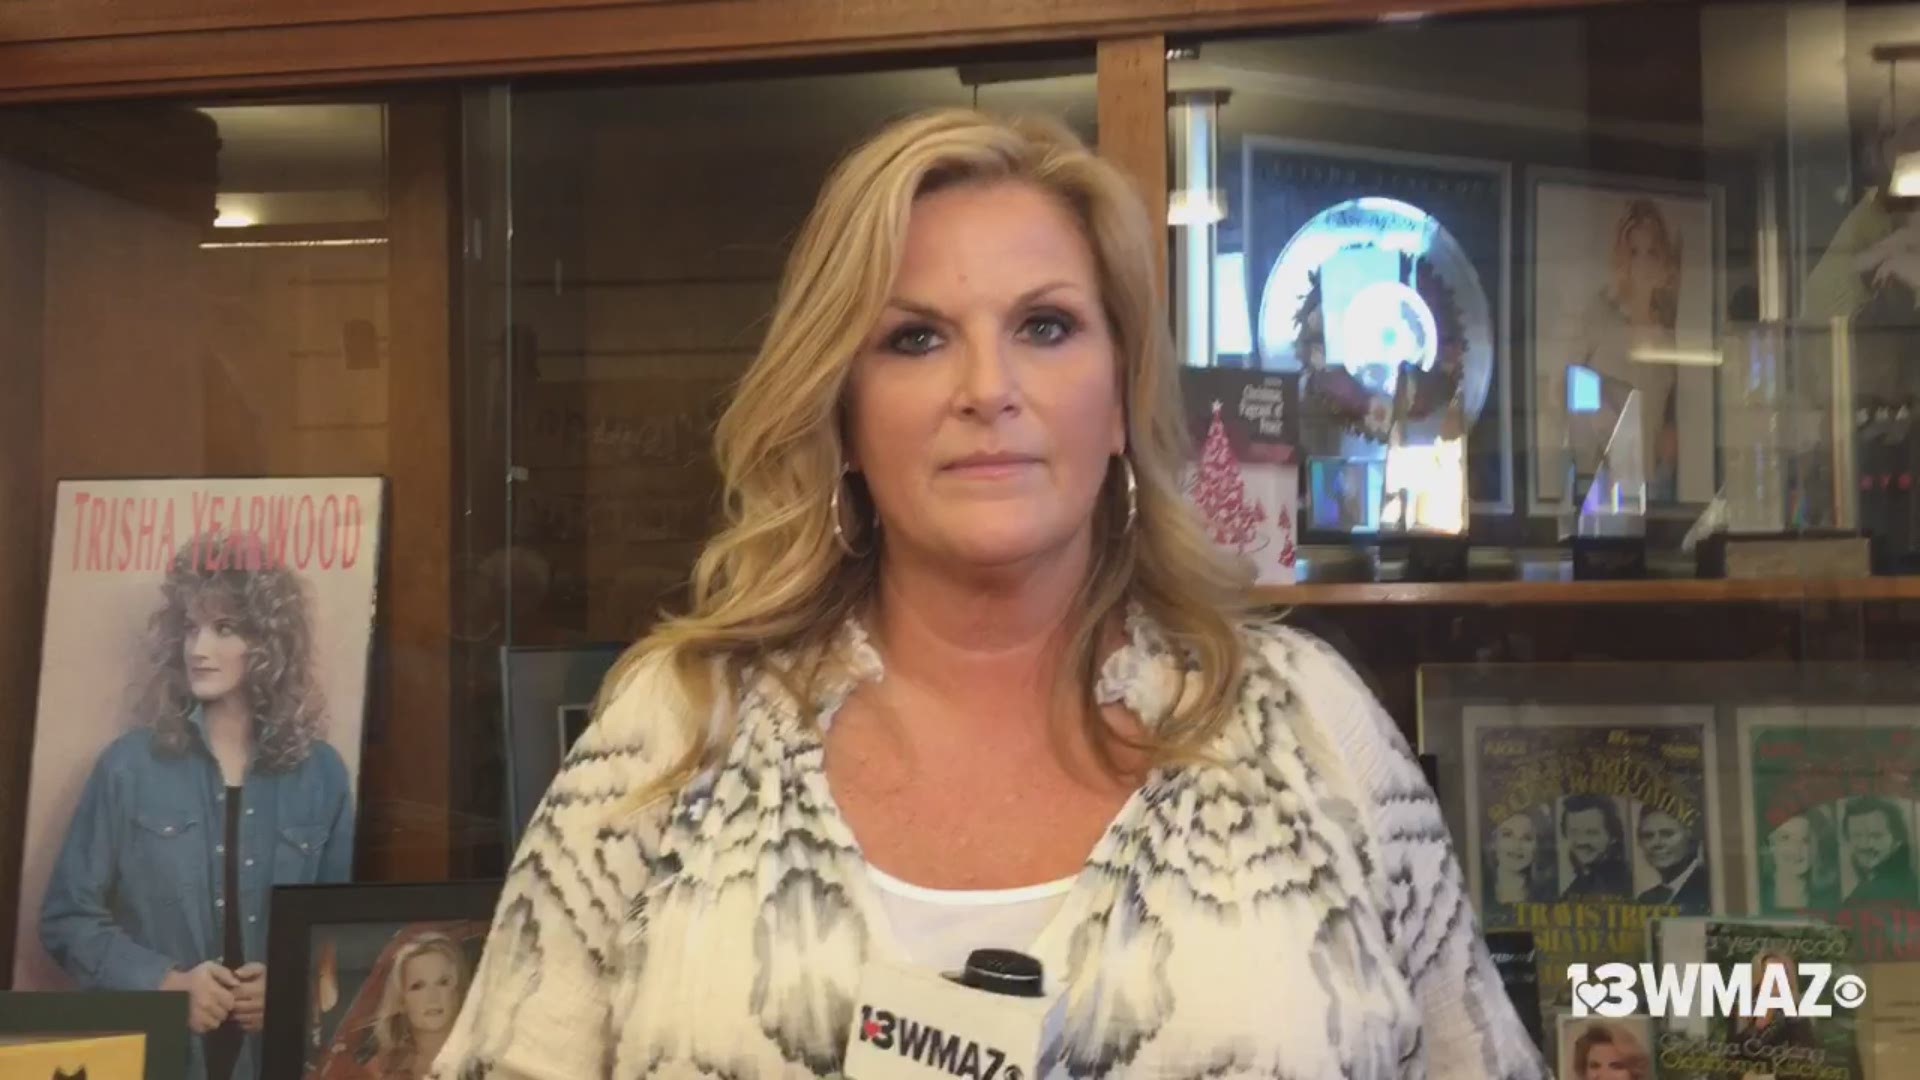 Country music star Trisha Yearwood is back in her hometown of Monticello Friday night. She's holding an album release party, and she says she's overwhelmed by the amount of support the town is showing her.